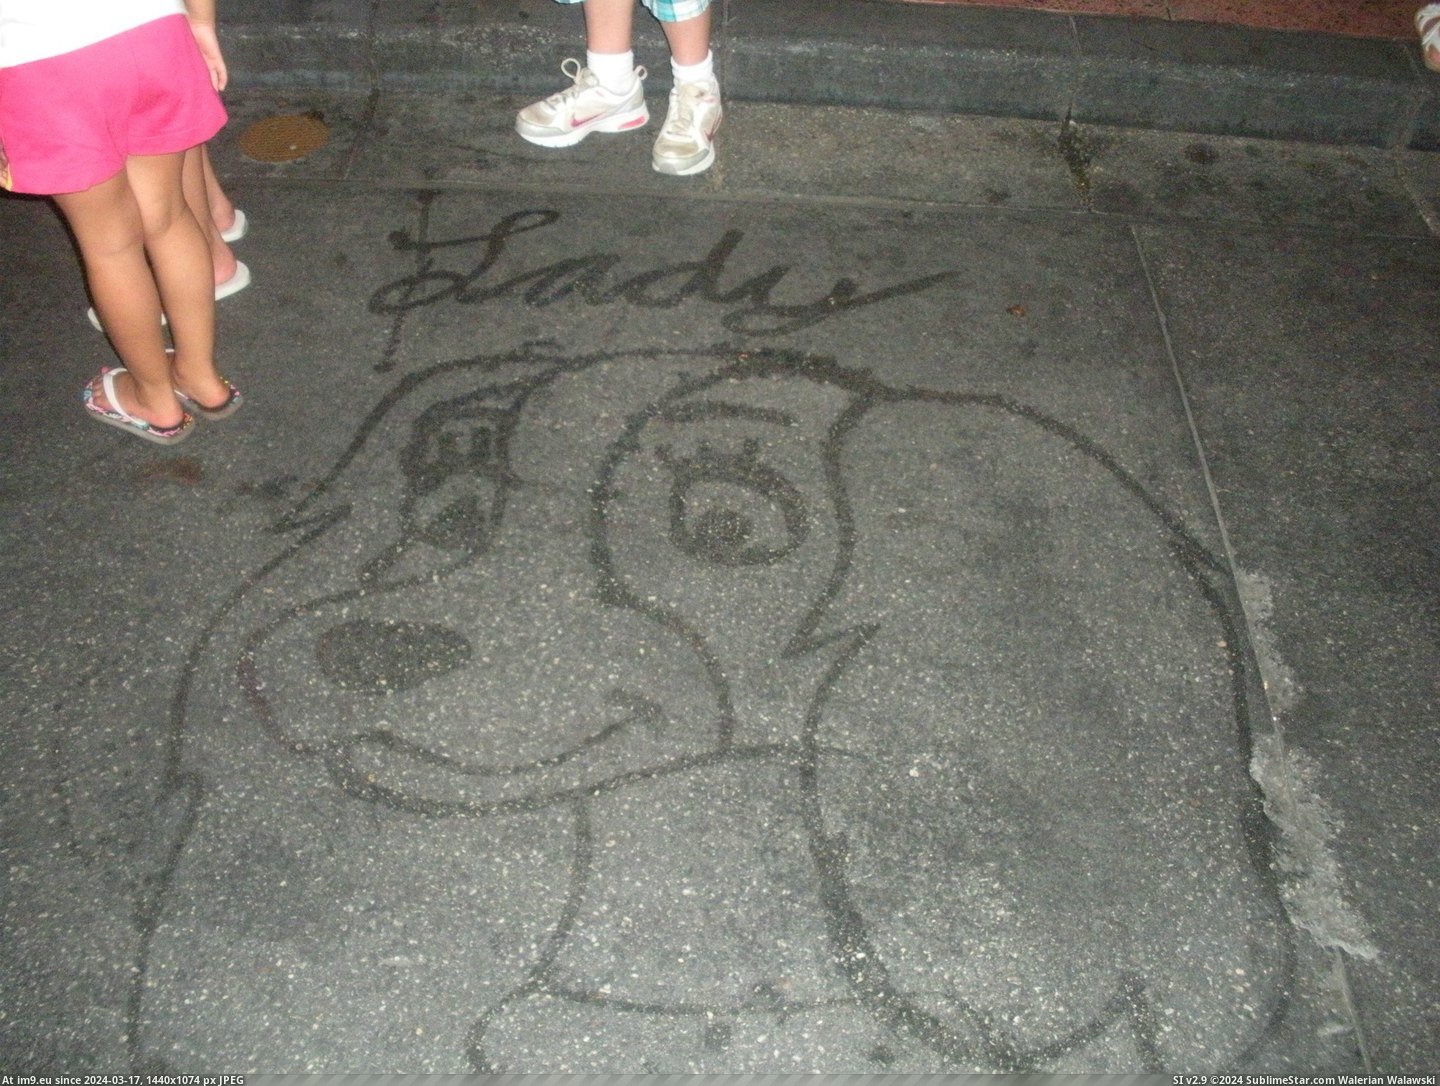 #World #Water #Disney #Guests #Janitor #Broom #Entertain #Characters #Drew #Sidewalk [Pics] As a janitor at Disney World, I drew characters with water and a broom on the sidewalk to entertain guests. 6 Pic. (Image of album My r/PICS favs))